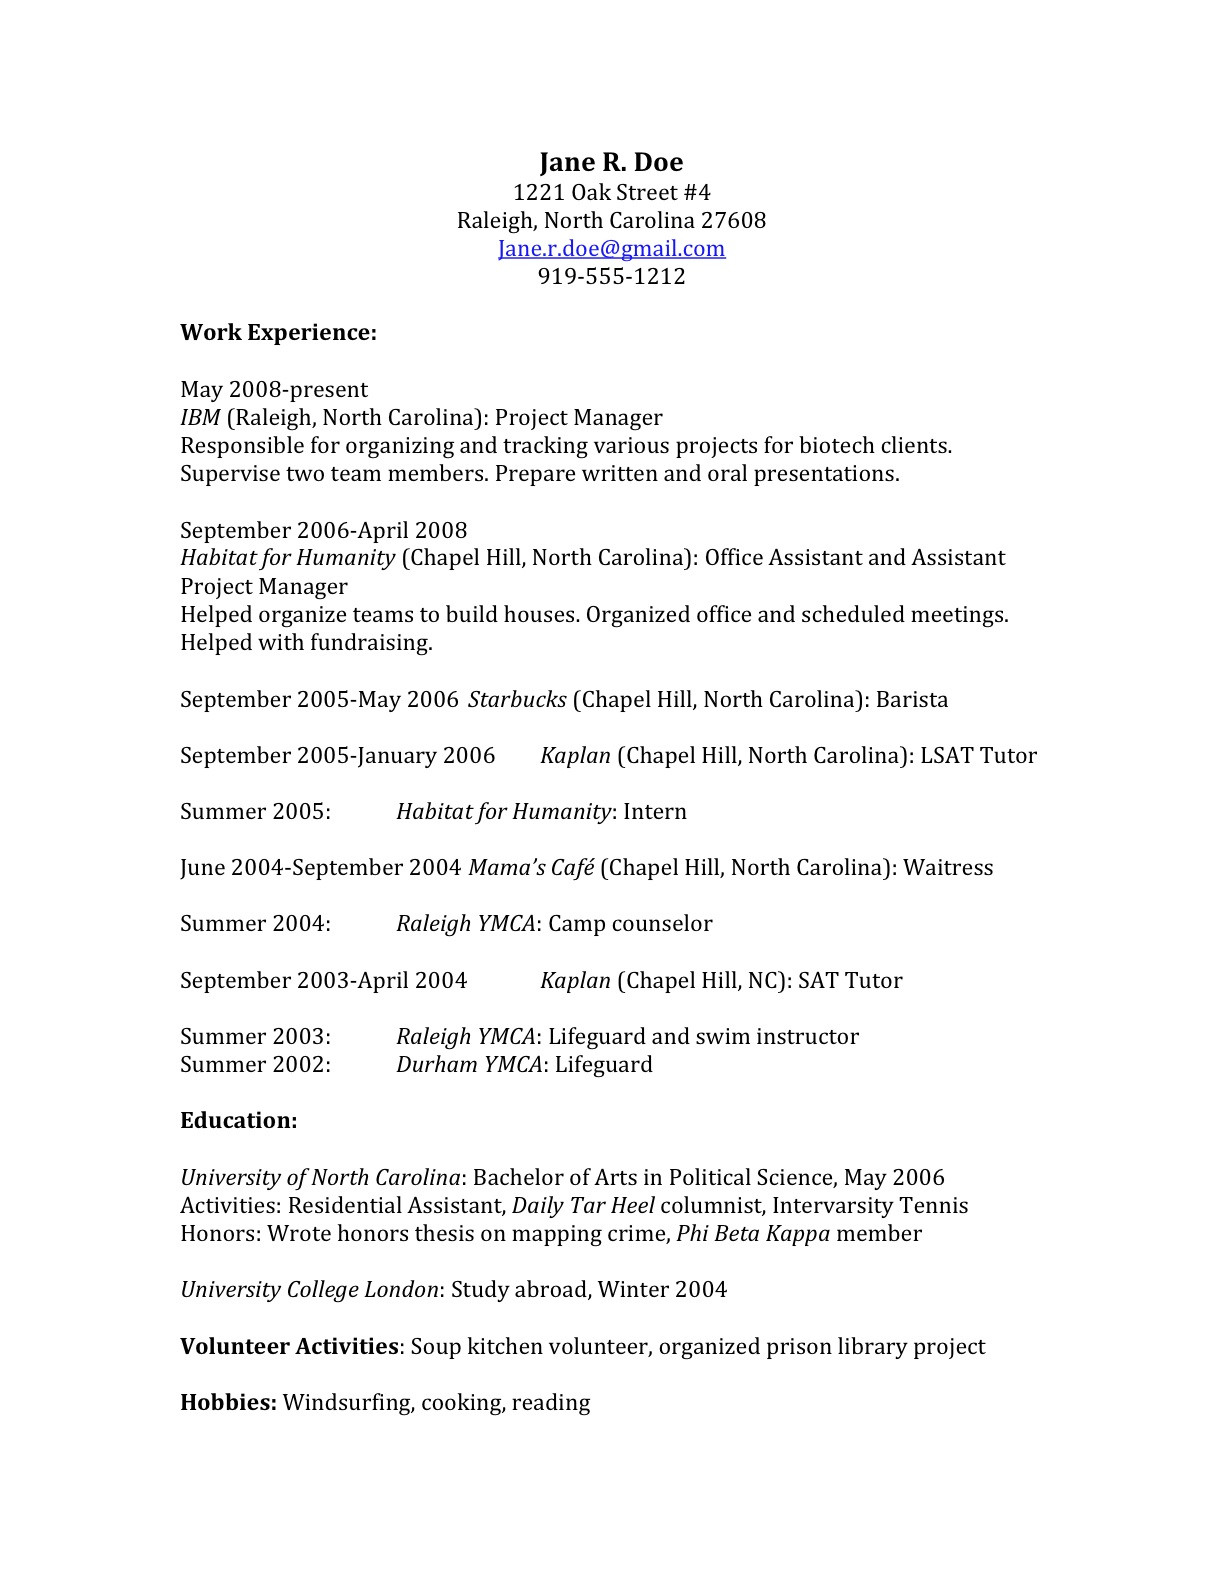 Resume Templates for Law School Applications How to Craft A Law School Application that Gets You In: Sample …